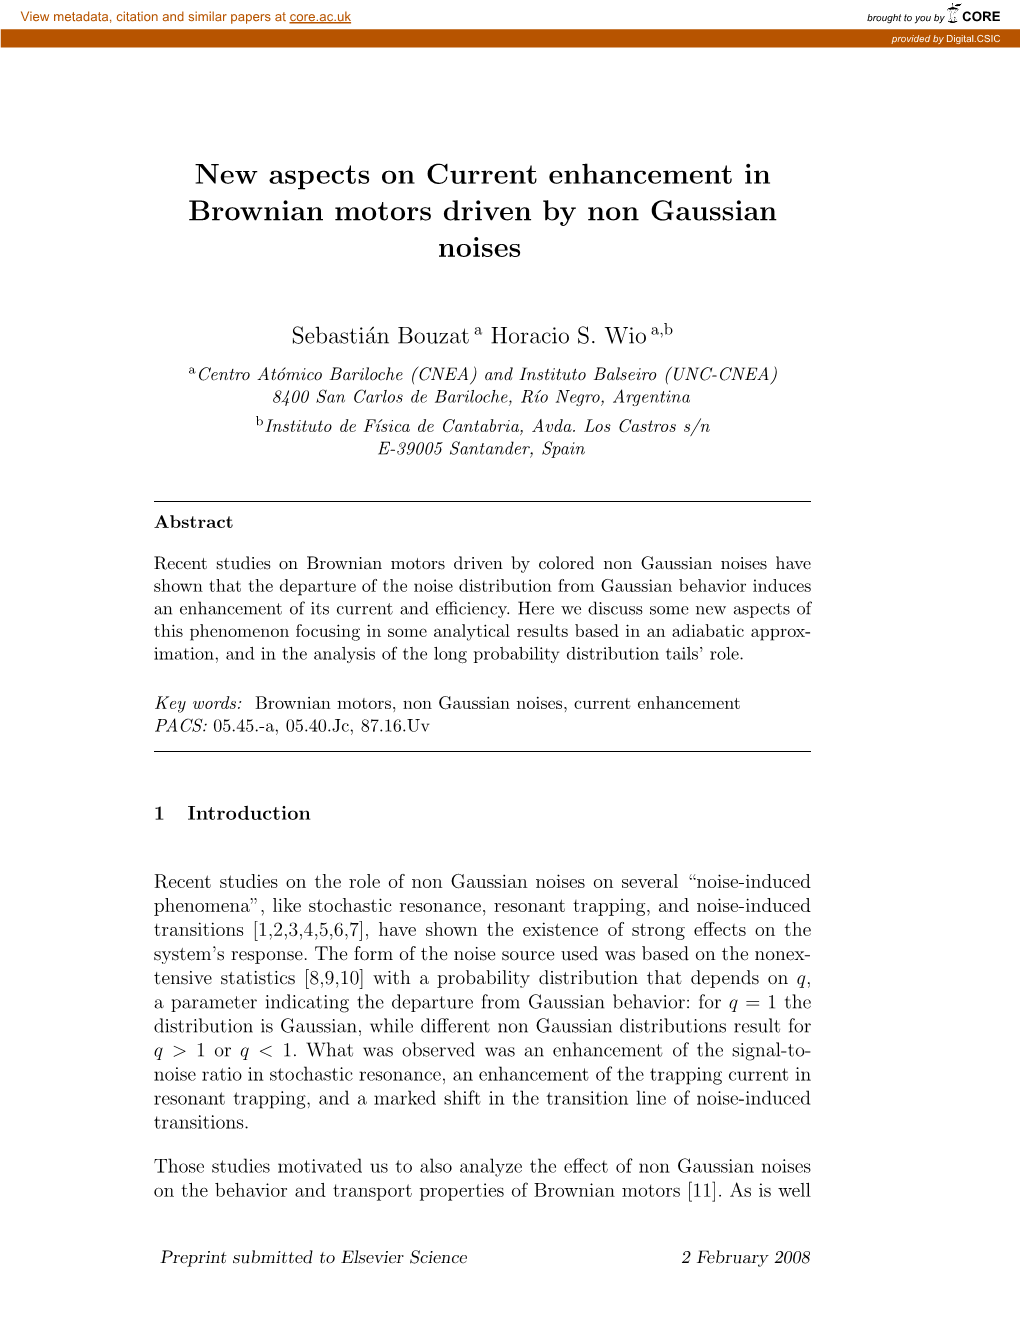 New Aspects on Current Enhancement in Brownian Motors Driven by Non Gaussian Noises